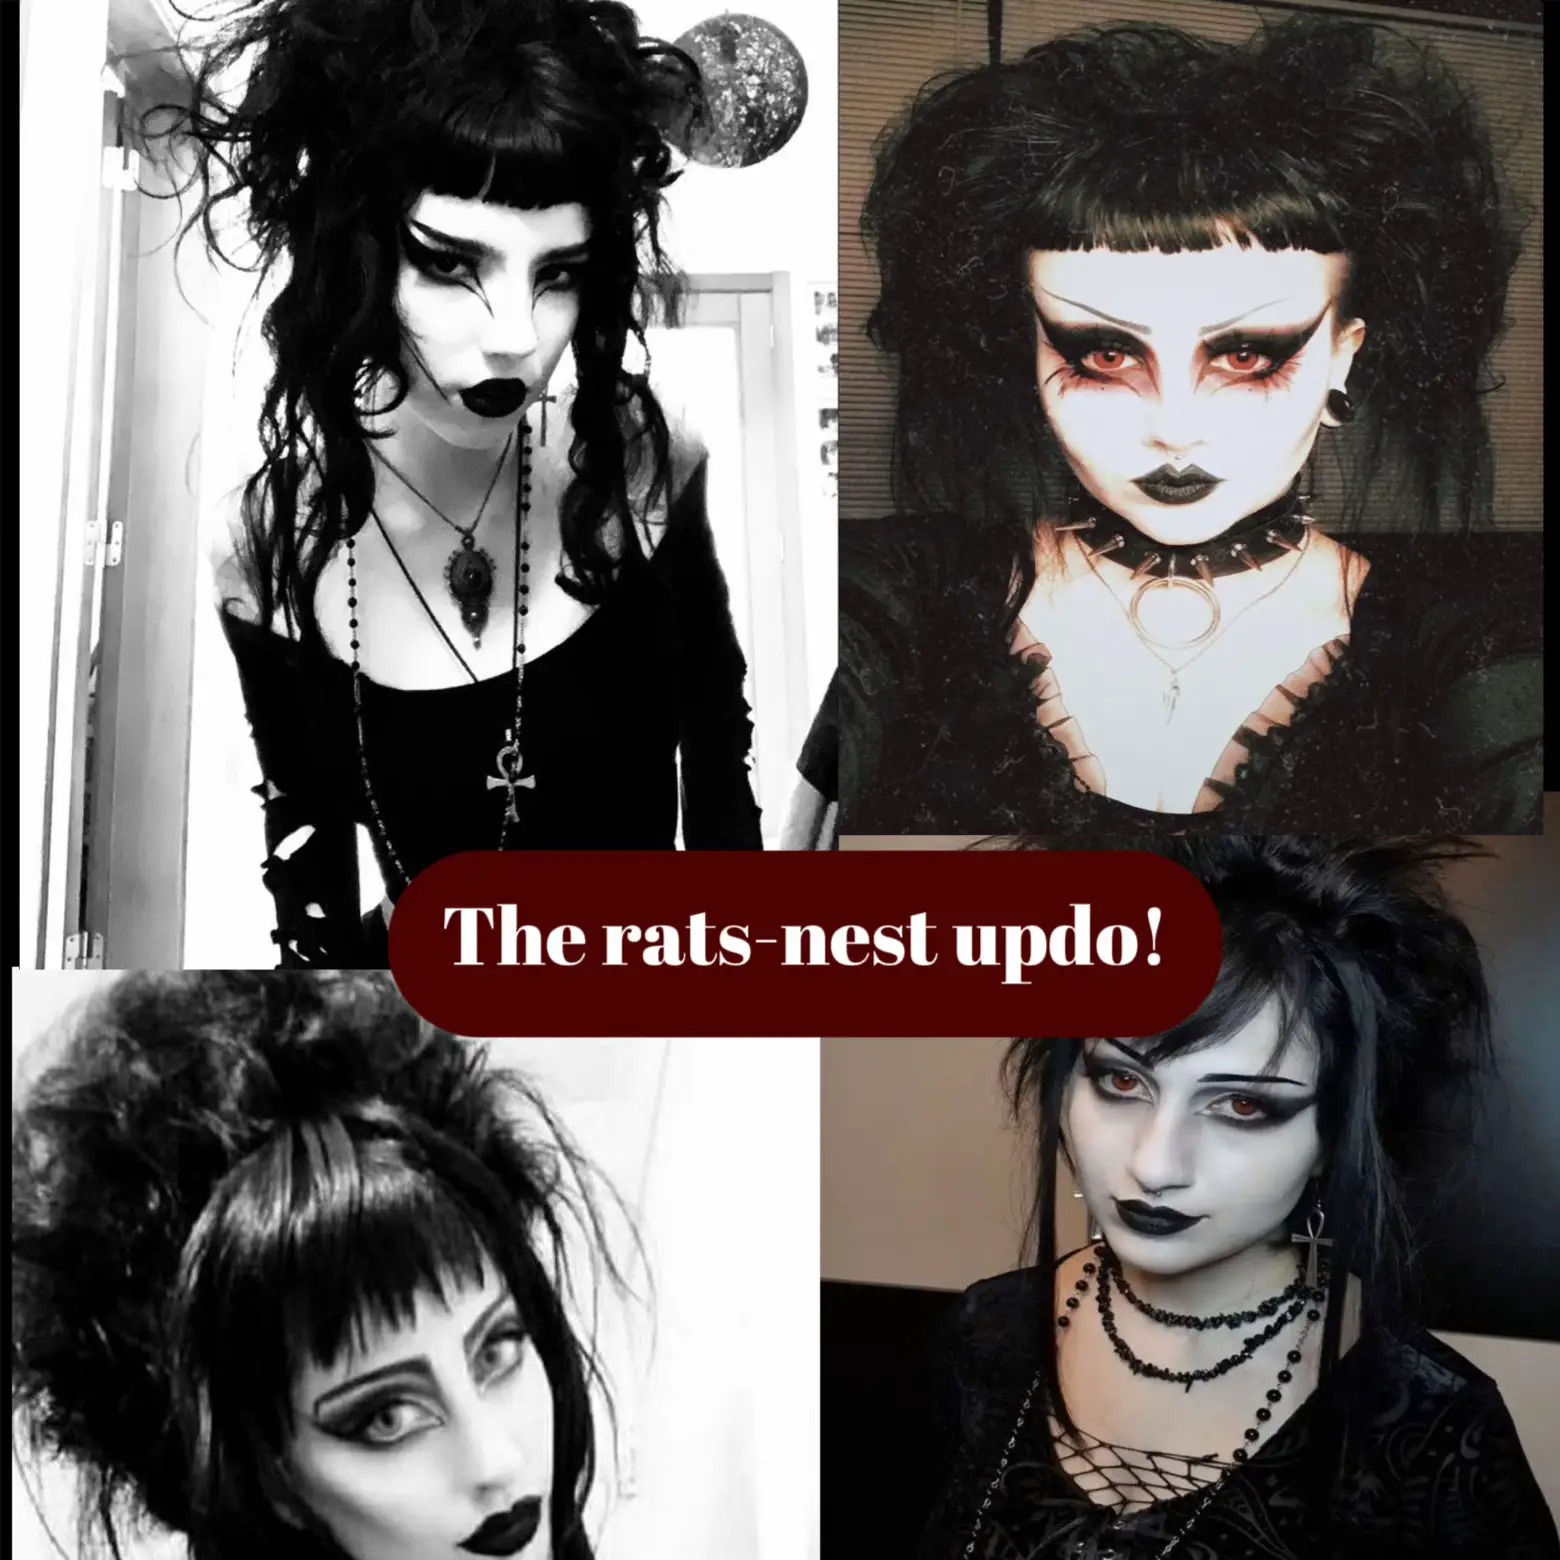 Feeling Victorian goth vibes : r/GothStyle